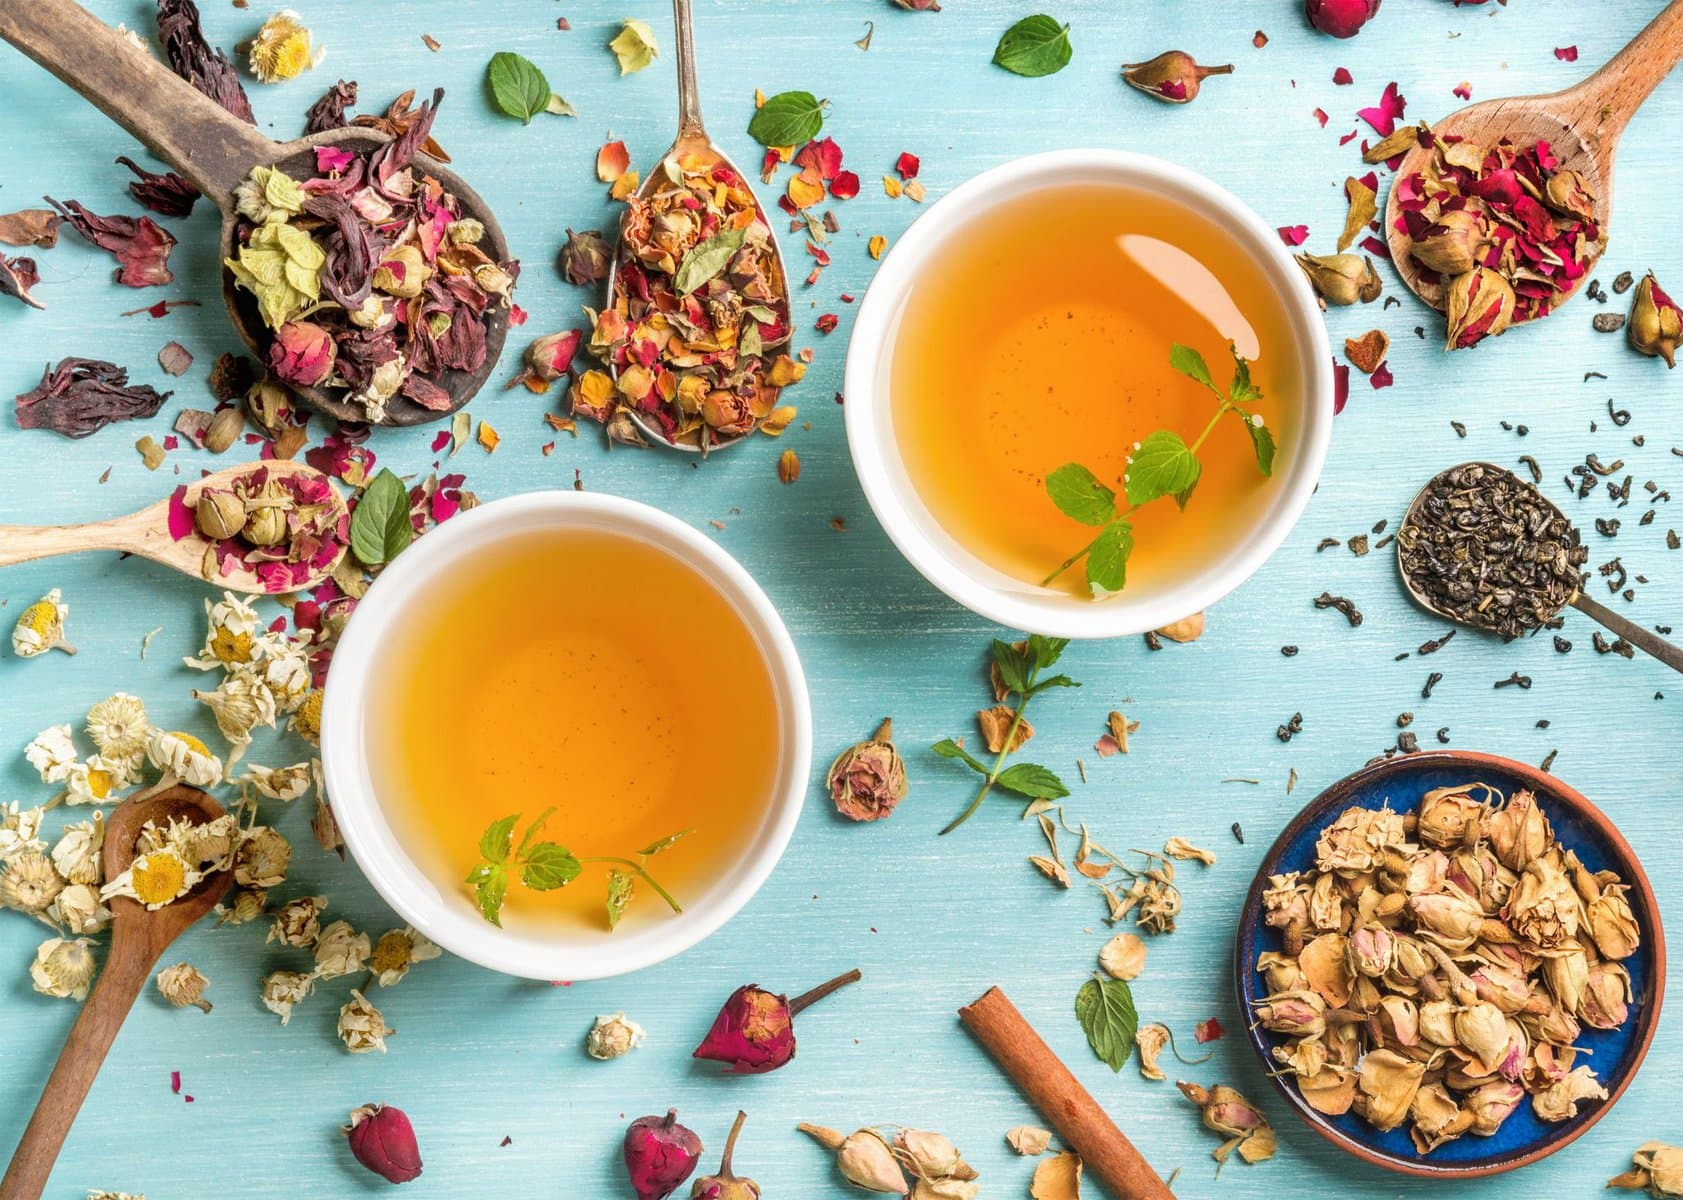 The Tea Diet and Cognitive Function: Improving Mental Clarity and Focus